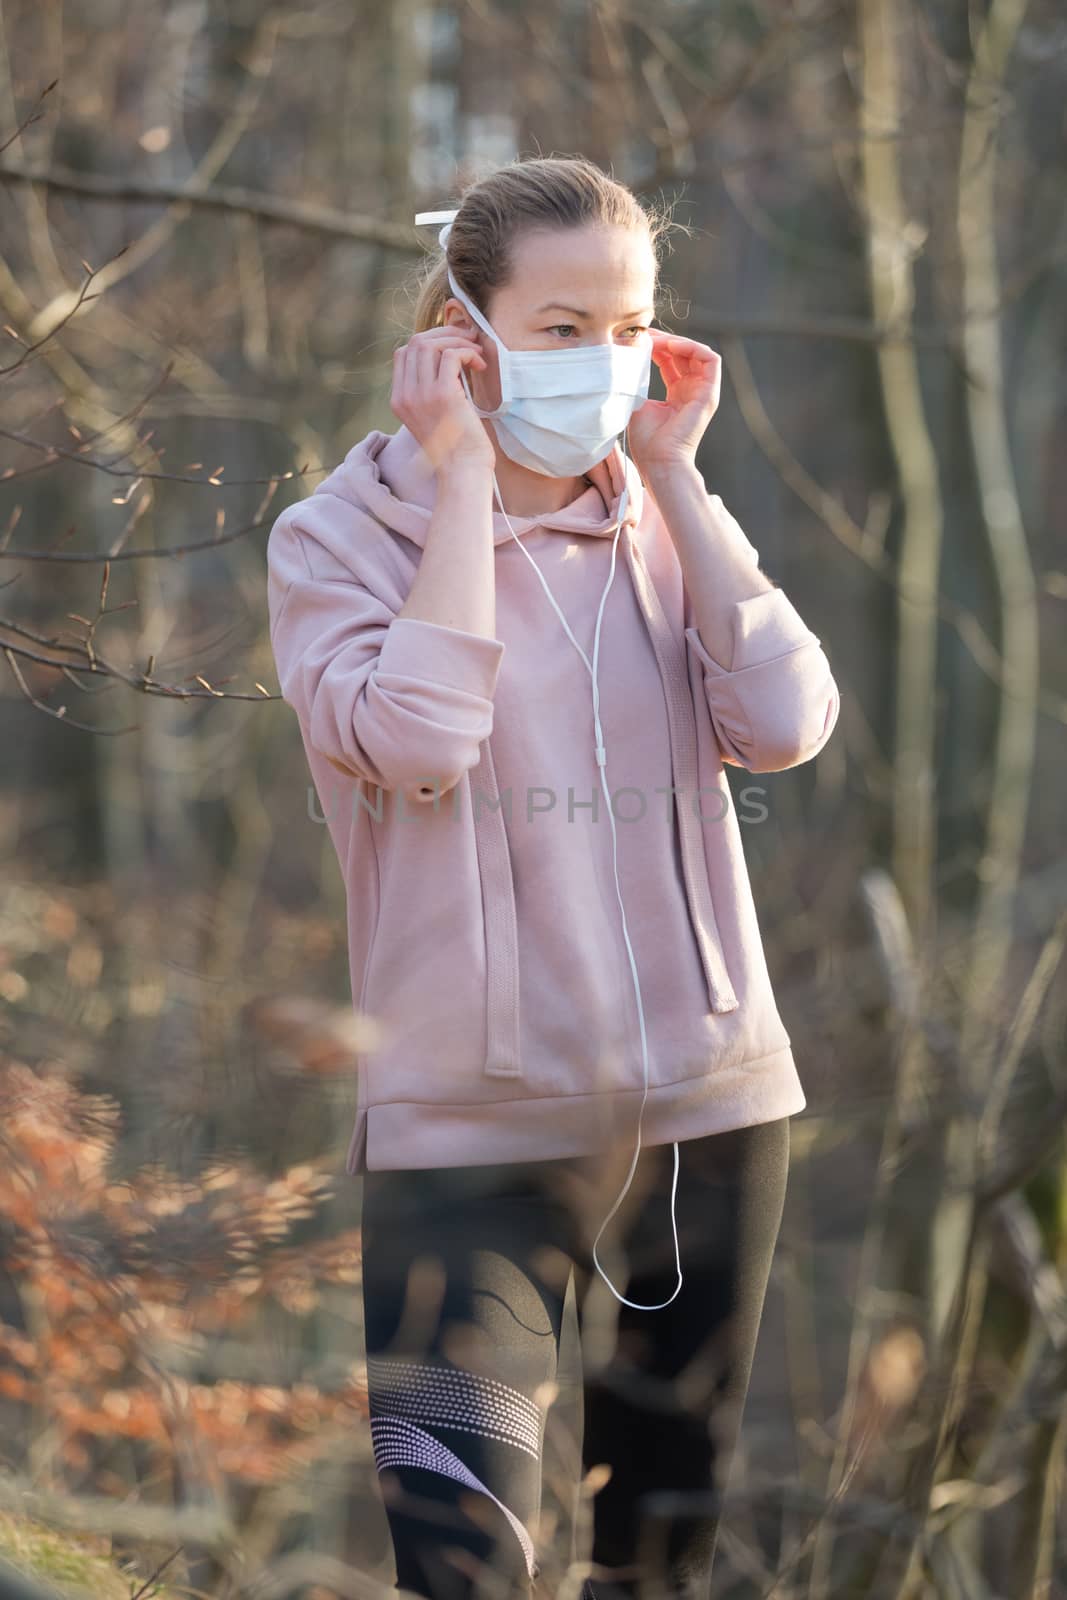 Portrait of caucasian sporty woman wearing medical protection face mask while walking in park, relaxing and listening to music. Corona virus, or Covid-19, is spreading all over the world.